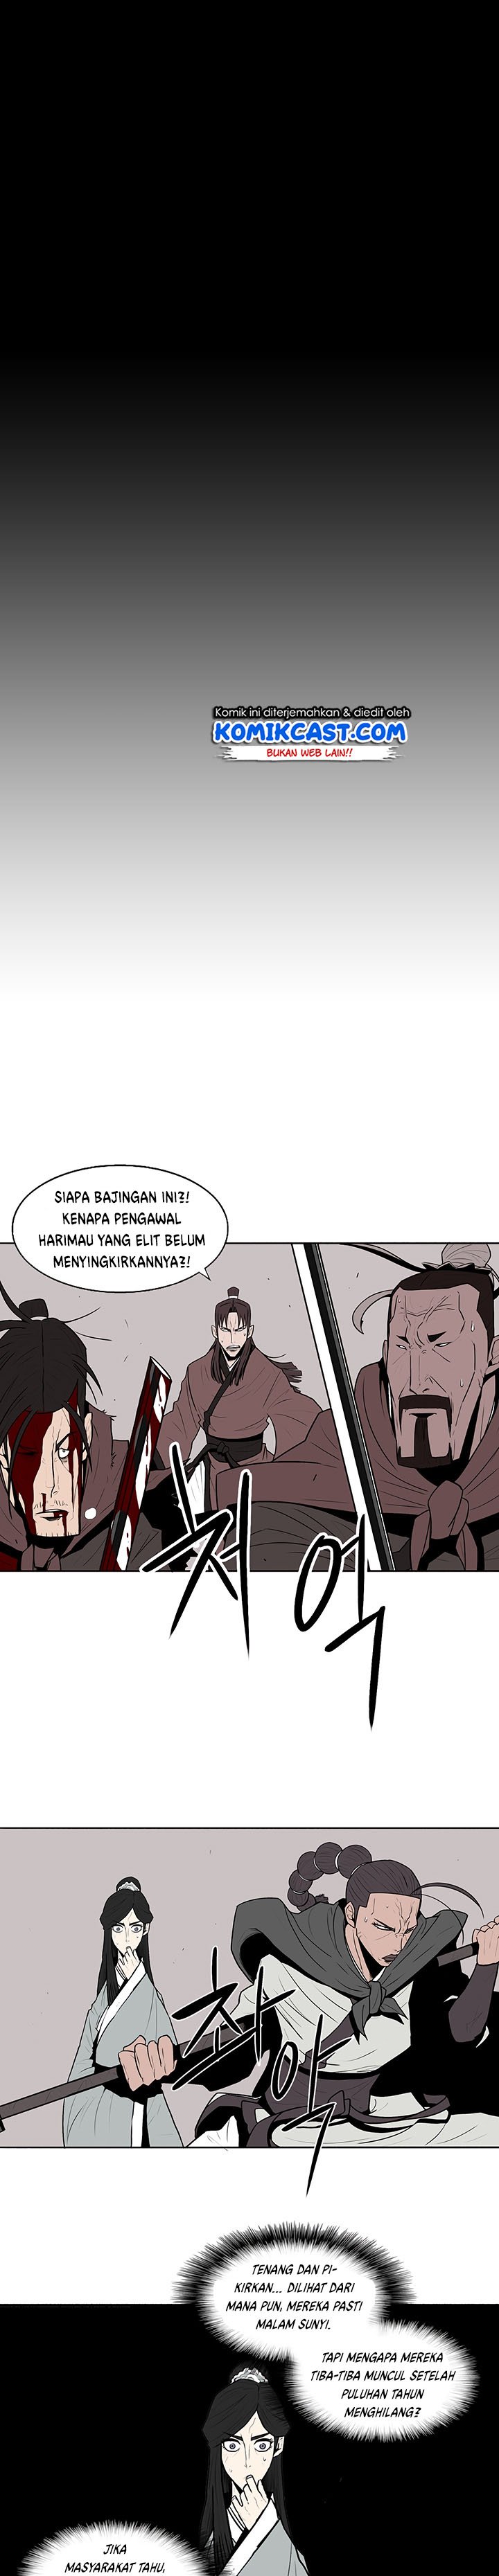 Legend of the Northern Blade Chapter 10